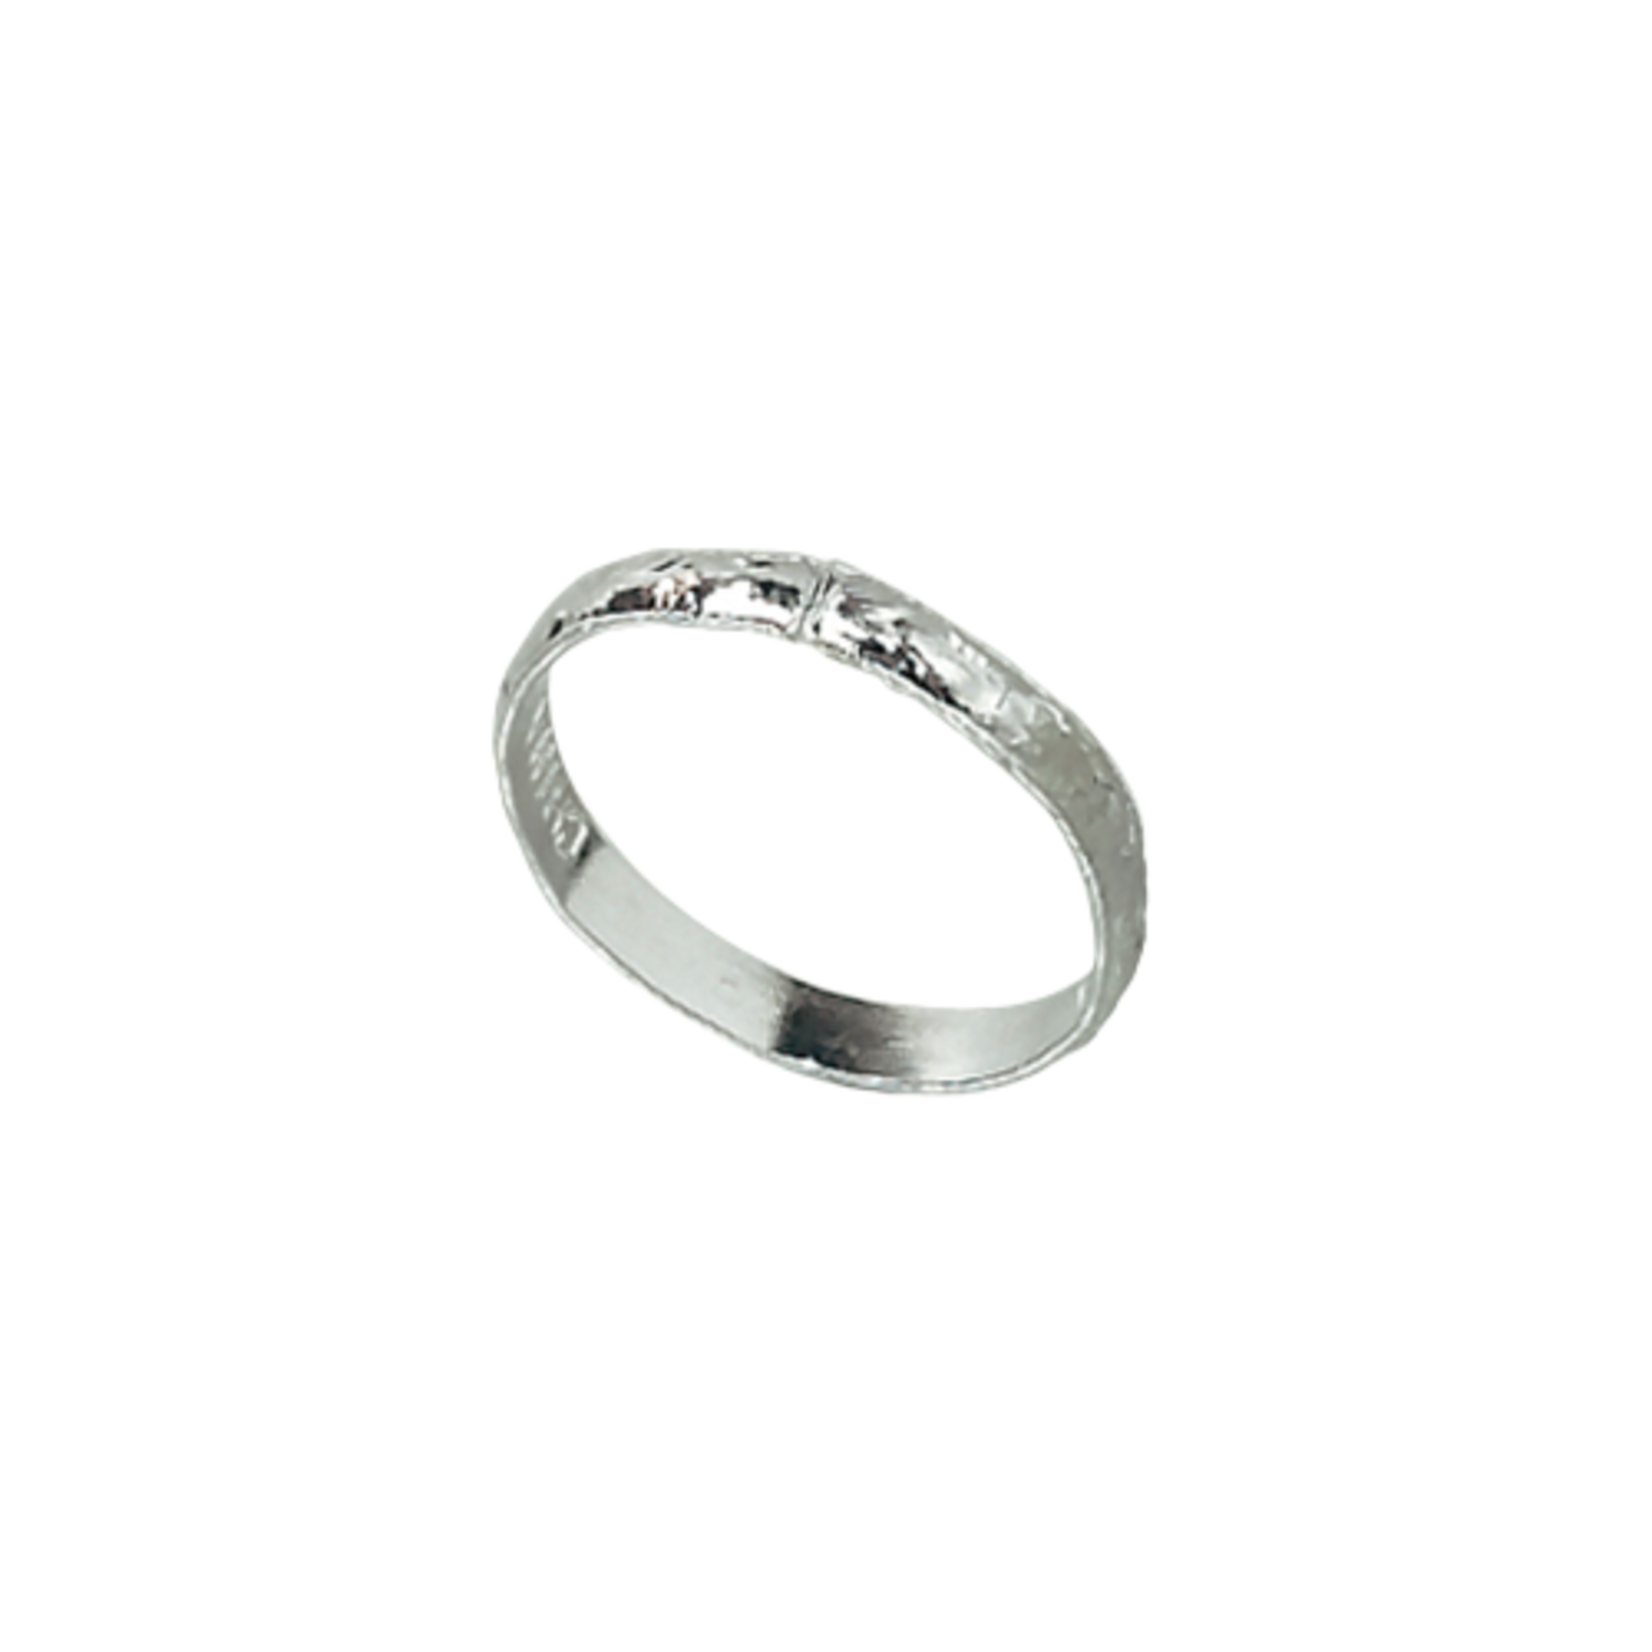 WEDDING BANDS - SILVER - 288PC